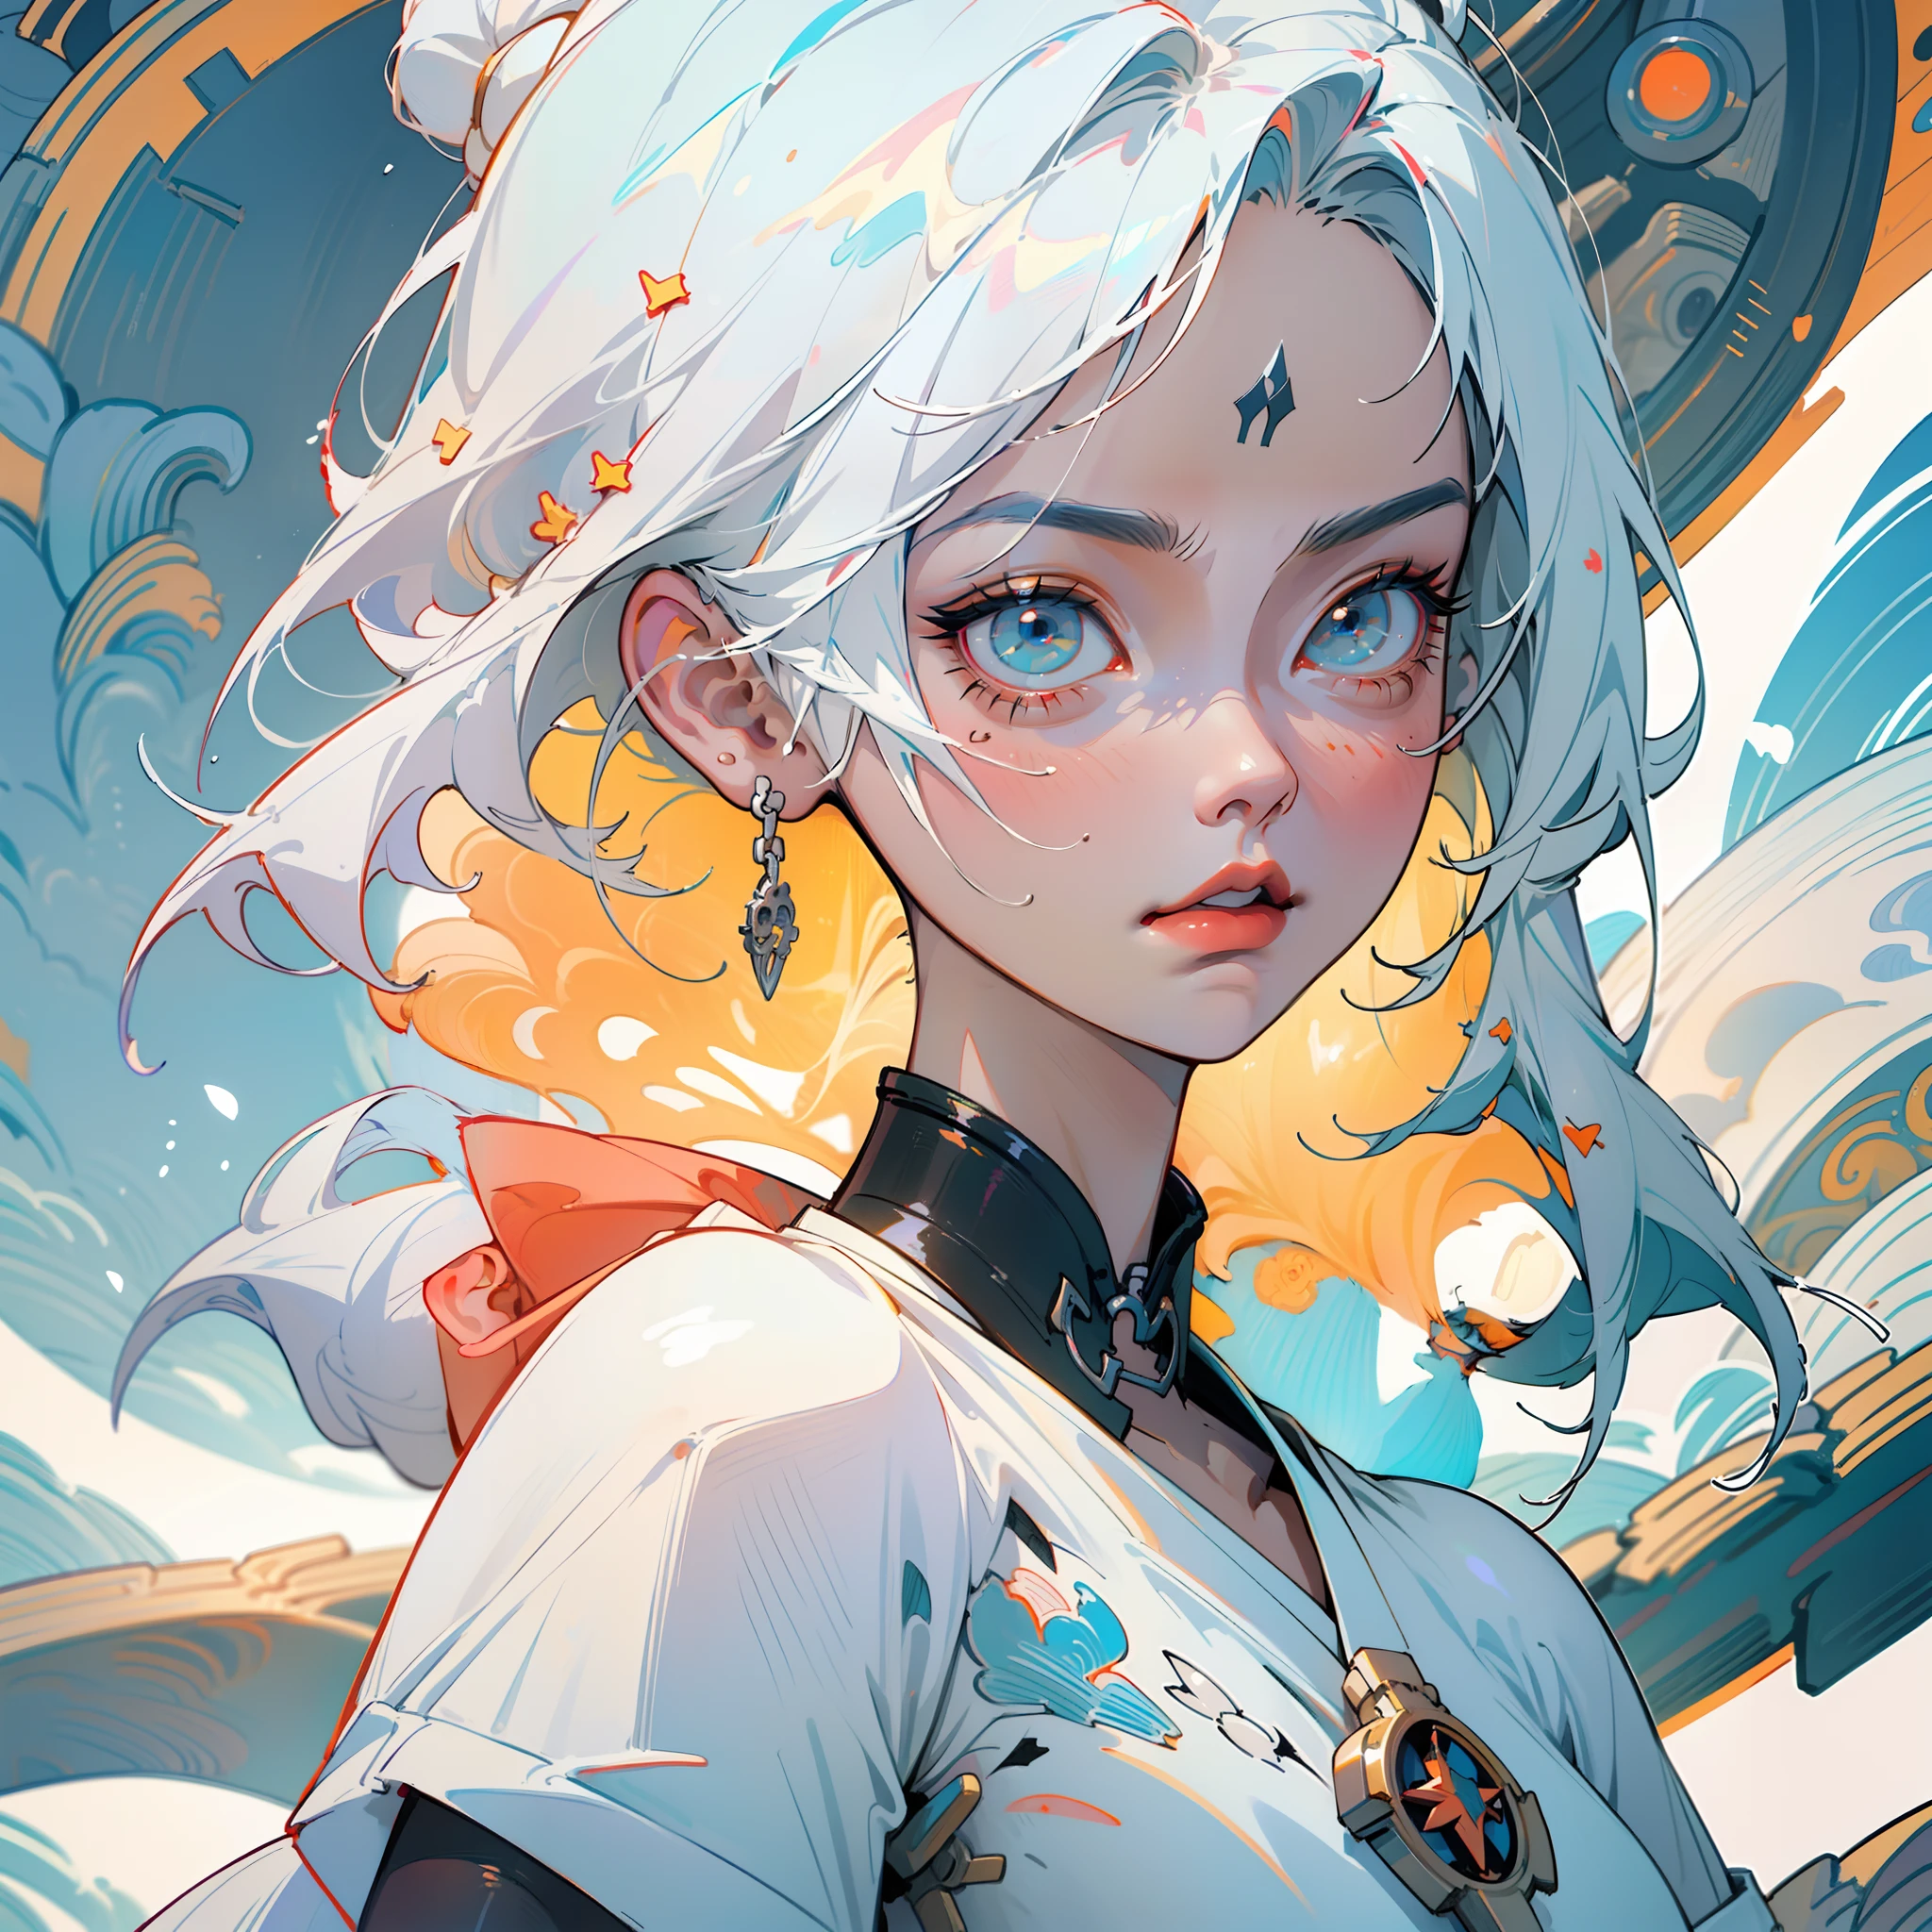 close-up of a woman with white hair and white mask, Beautiful figure painting, Guviz, Guvitz style illustrations, white haired god, Yang J, epic exquisite character art, awesome character art, Fan Qi, Wu Jun Shifan, Gu Vitz at pixiv art station, sword, knife, pistol, cyborg, (((masterpiece))), Dynamic Angle, UHD, 16k